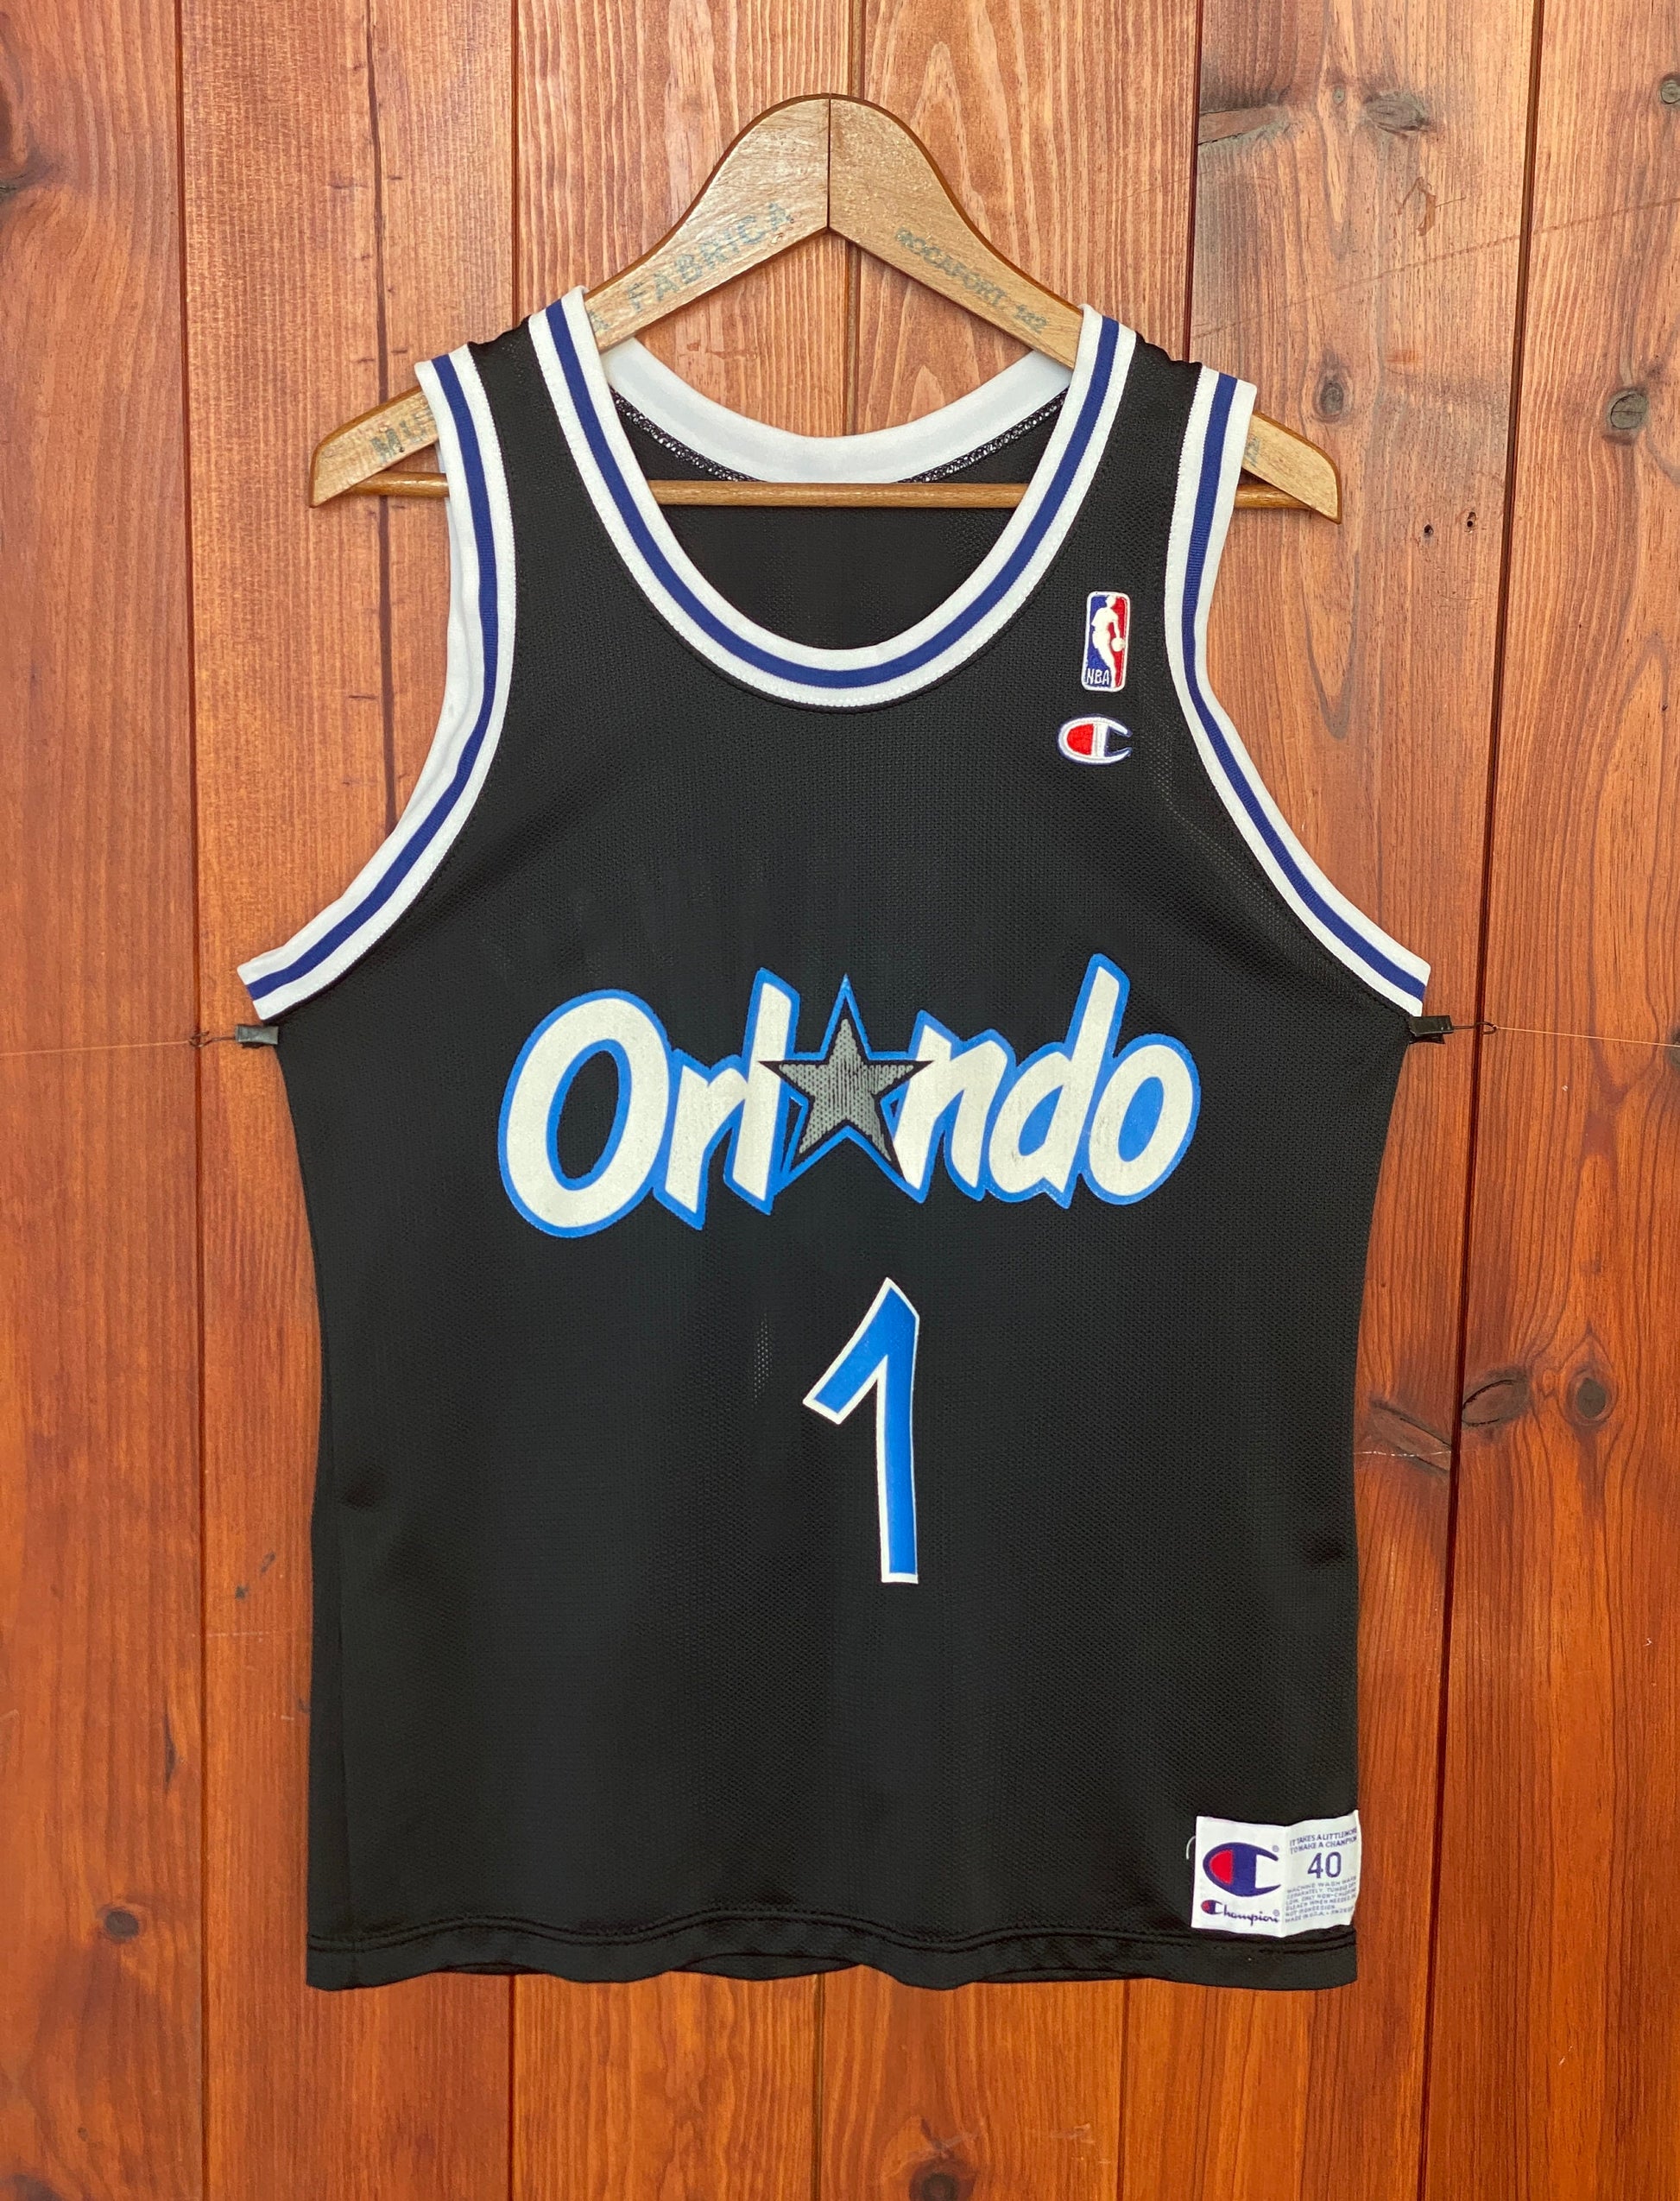 Vintage 90s Orlando Champion NBA jersey with player Hardaway #01, size 48 - front view.